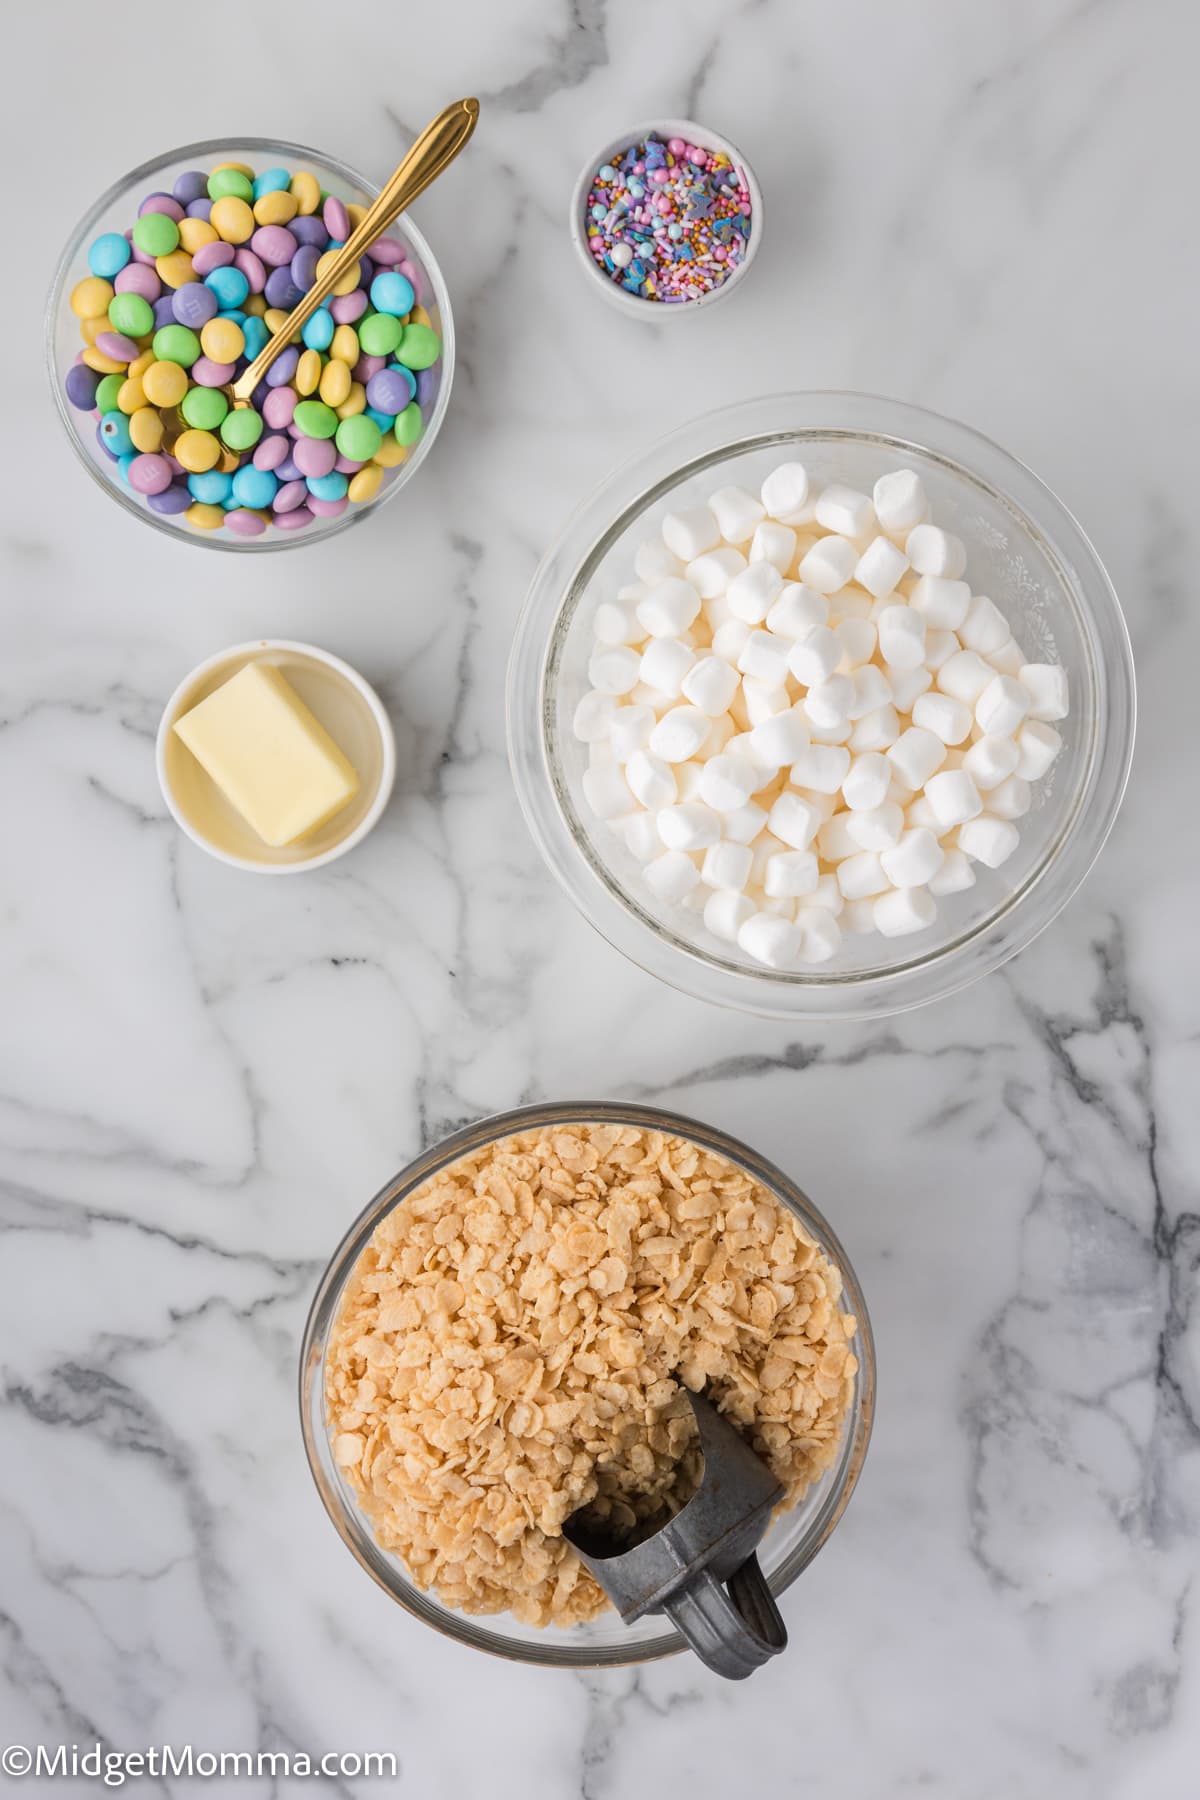 Ingredients for making easter rice krispie treats laid out on a marble countertop, including colorful candies, sprinkles, marshmallows, butter, and crispy rice cereal.